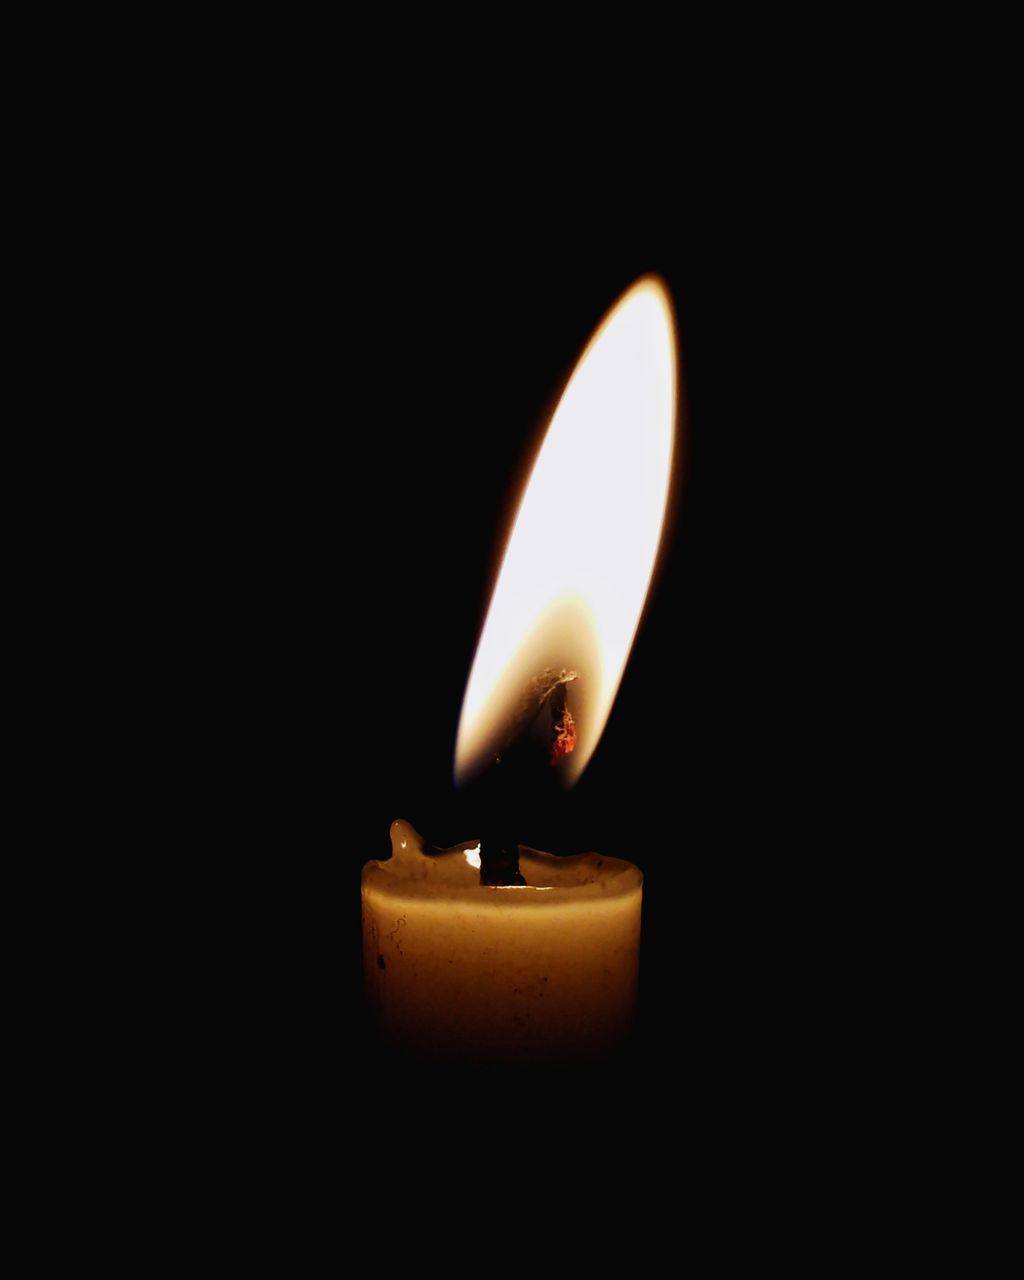 CLOSE-UP OF LIT CANDLE IN DARK